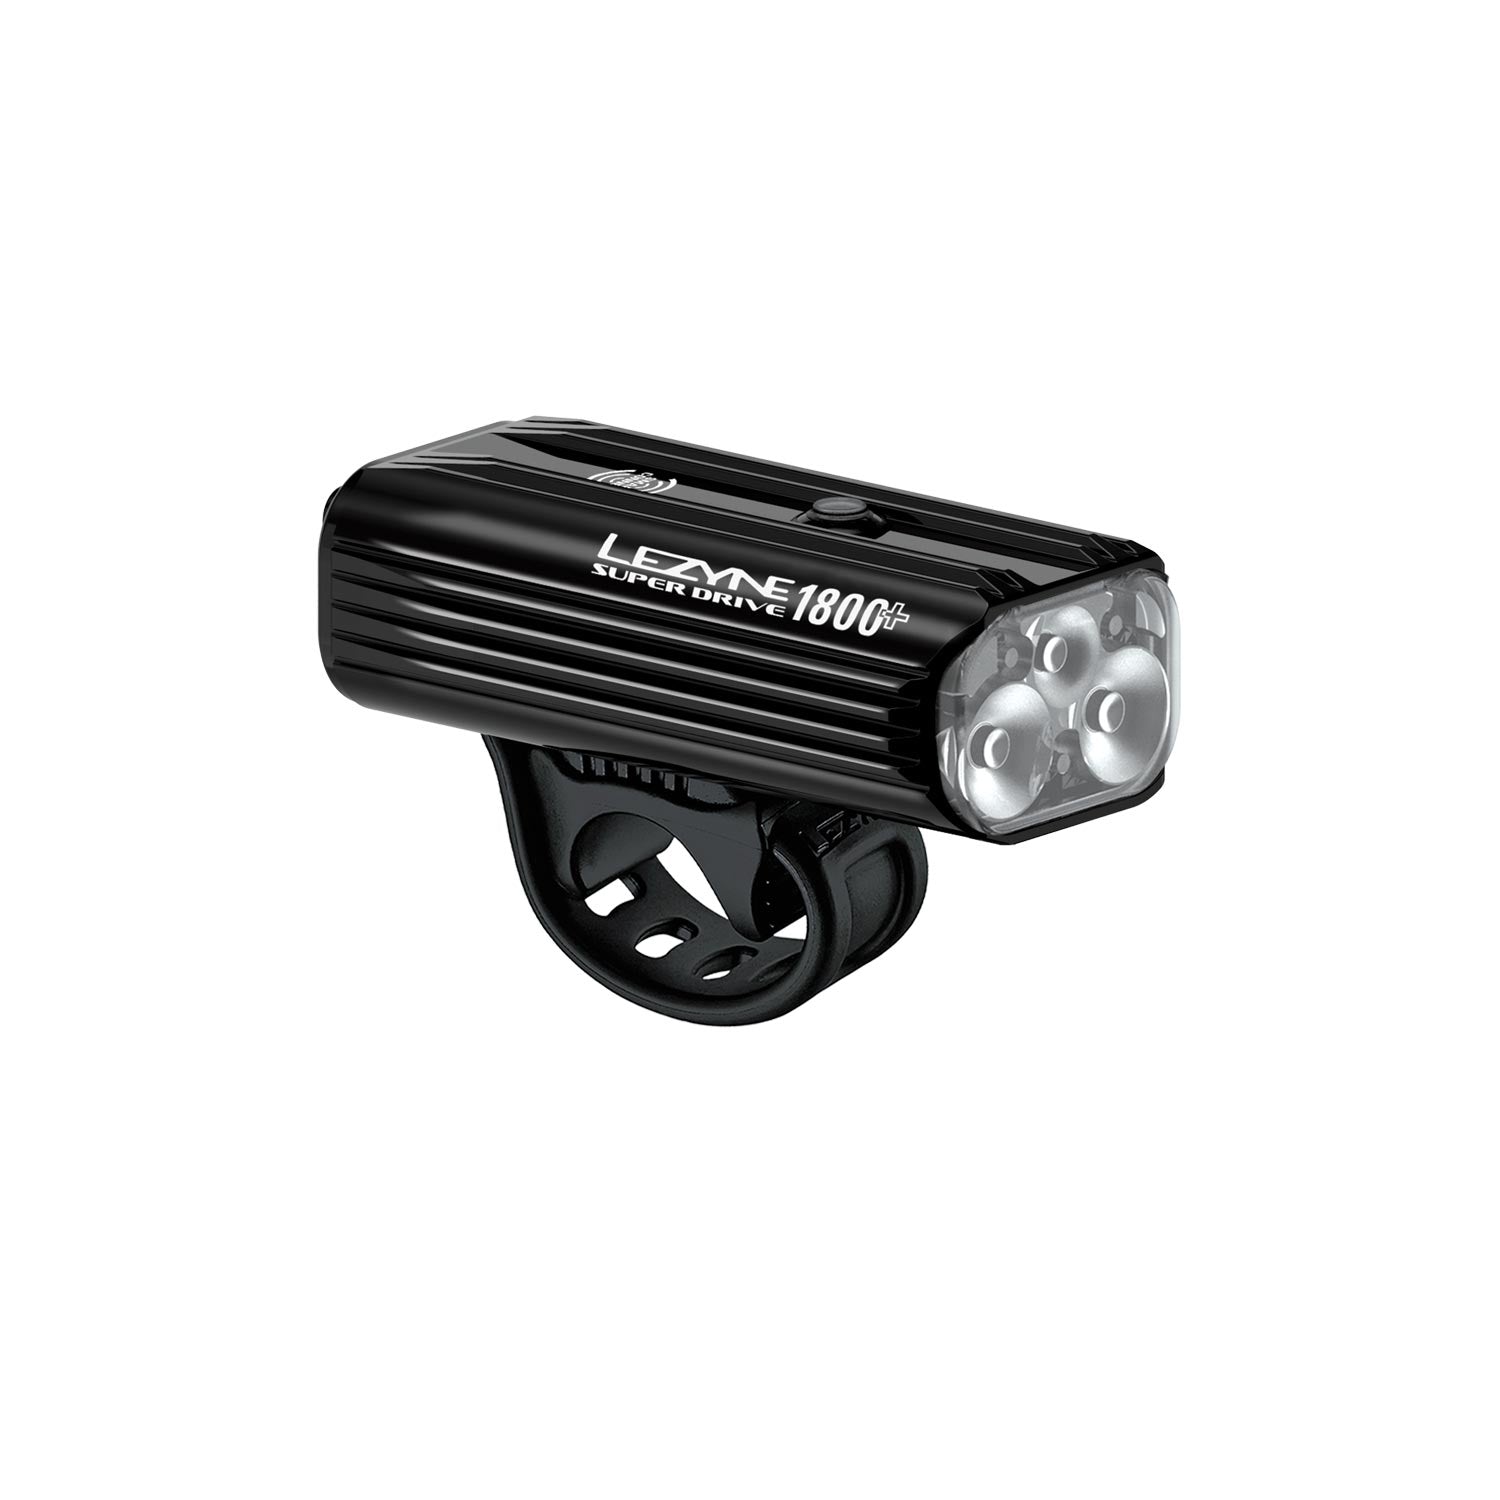 Product image of Super Drive 1800+ Smart front light